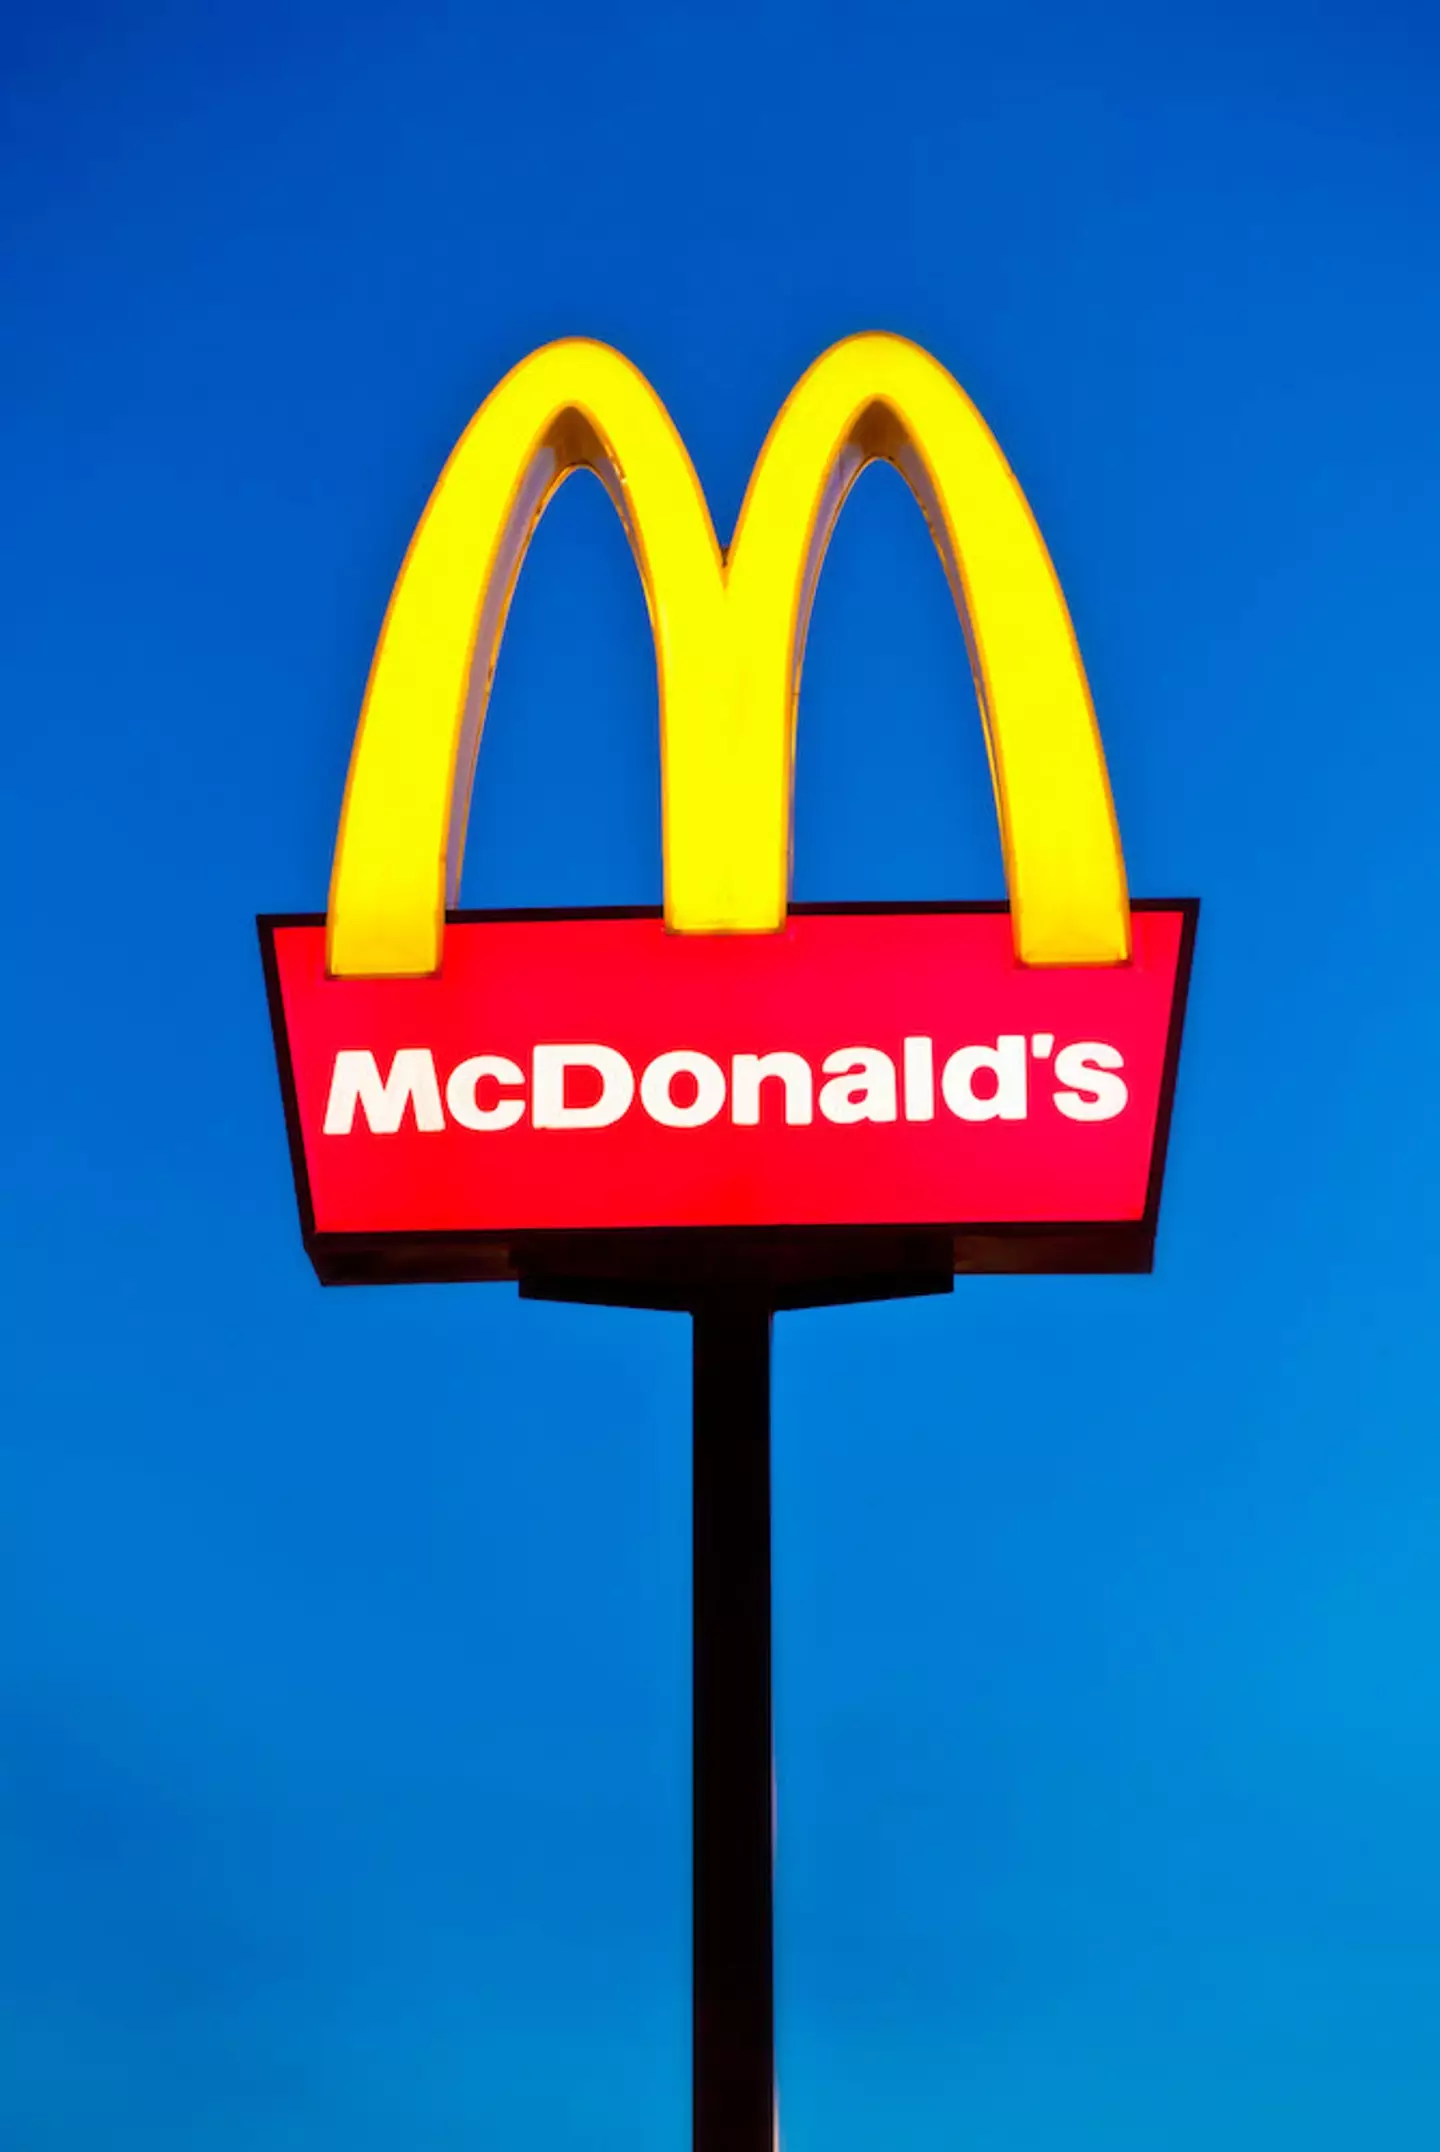 After a successful trial in the UK, Maccies fans in the US now have the chance to try out the controversial burger.